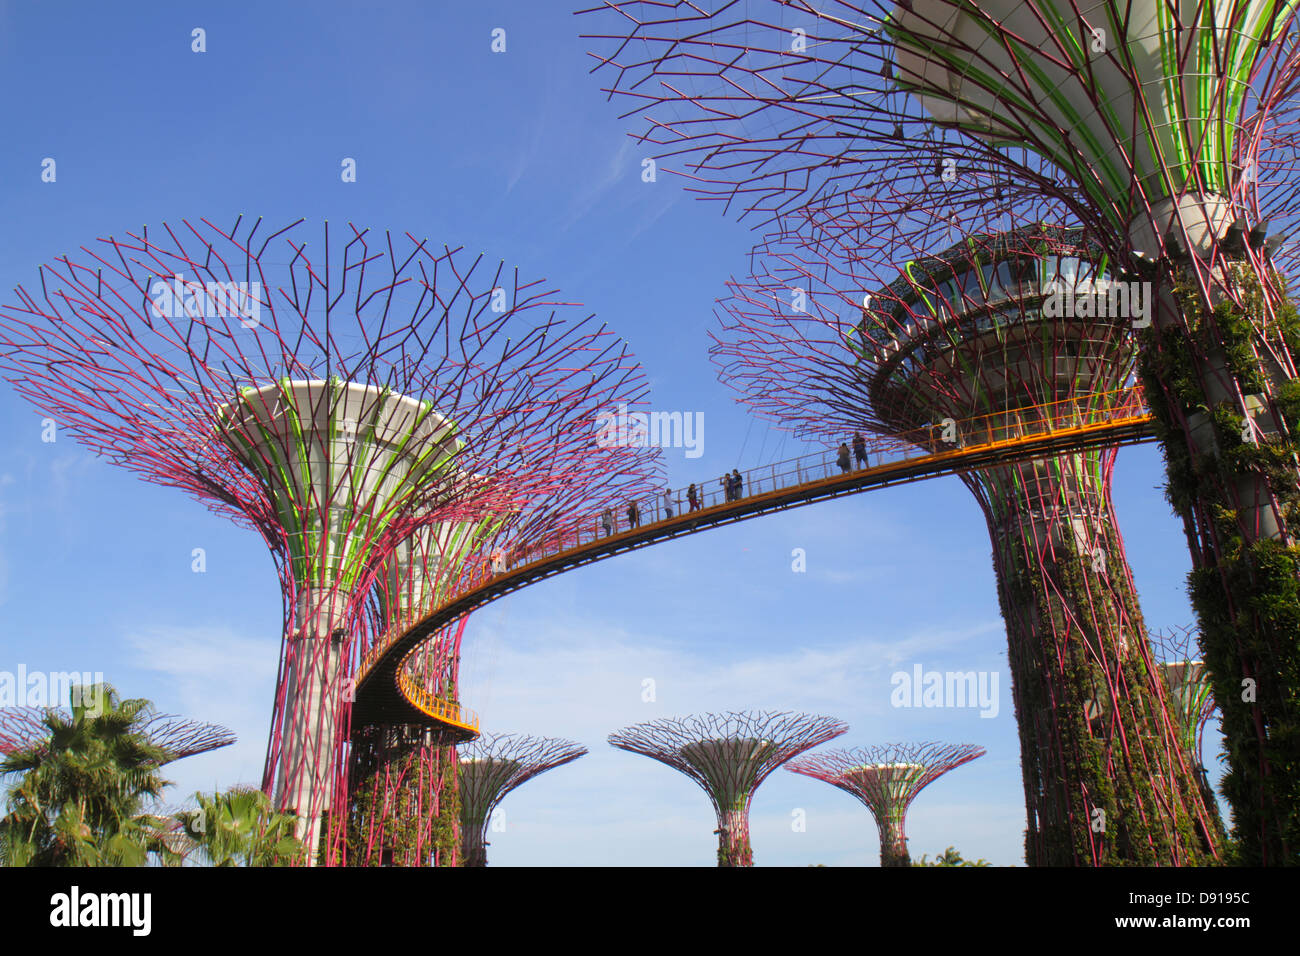 Singapore Gardens by the Bay,park,Supertrees,elevated walkway,Sing130202177 Stock Photo